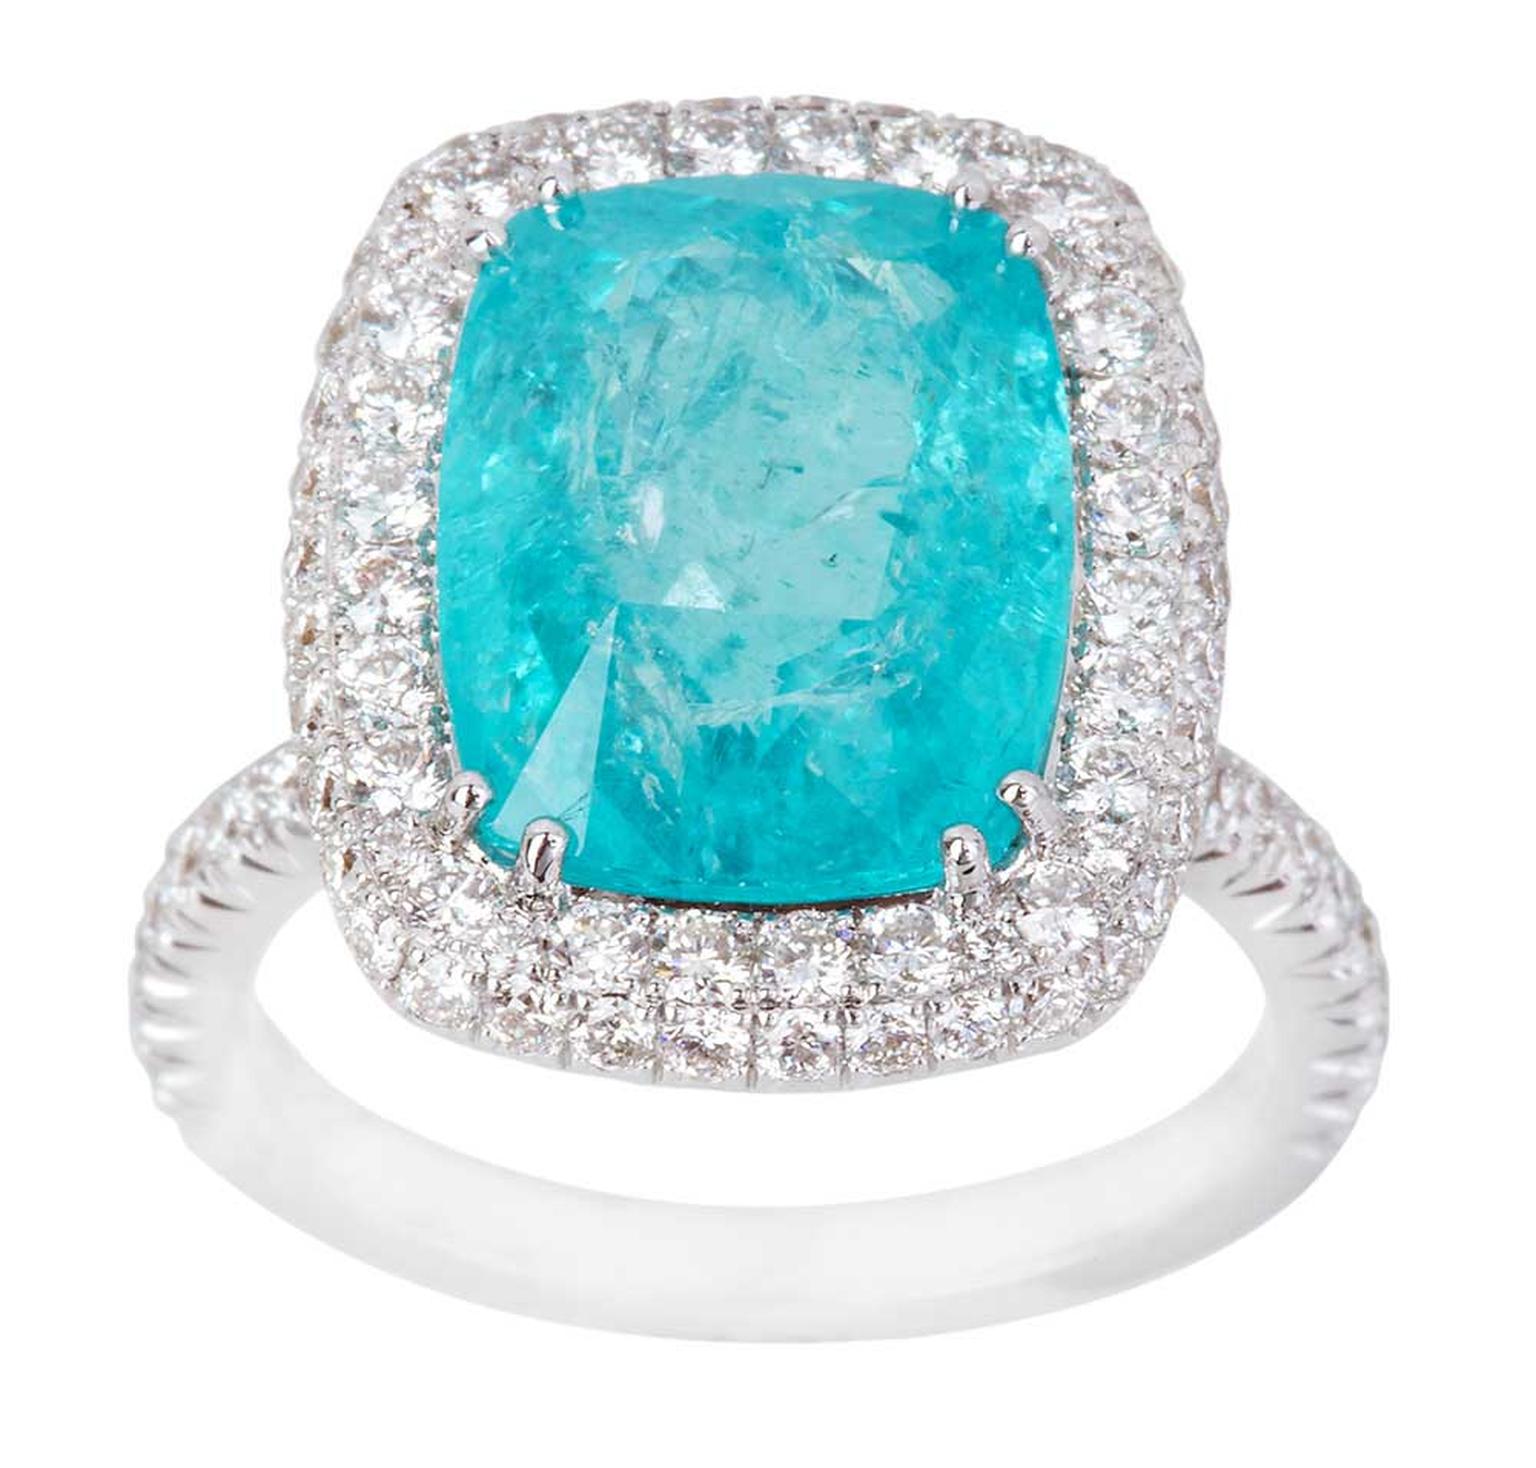 Nourbel & Le Cavelier Paraiba tourmaline ring in white gold with diamonds.